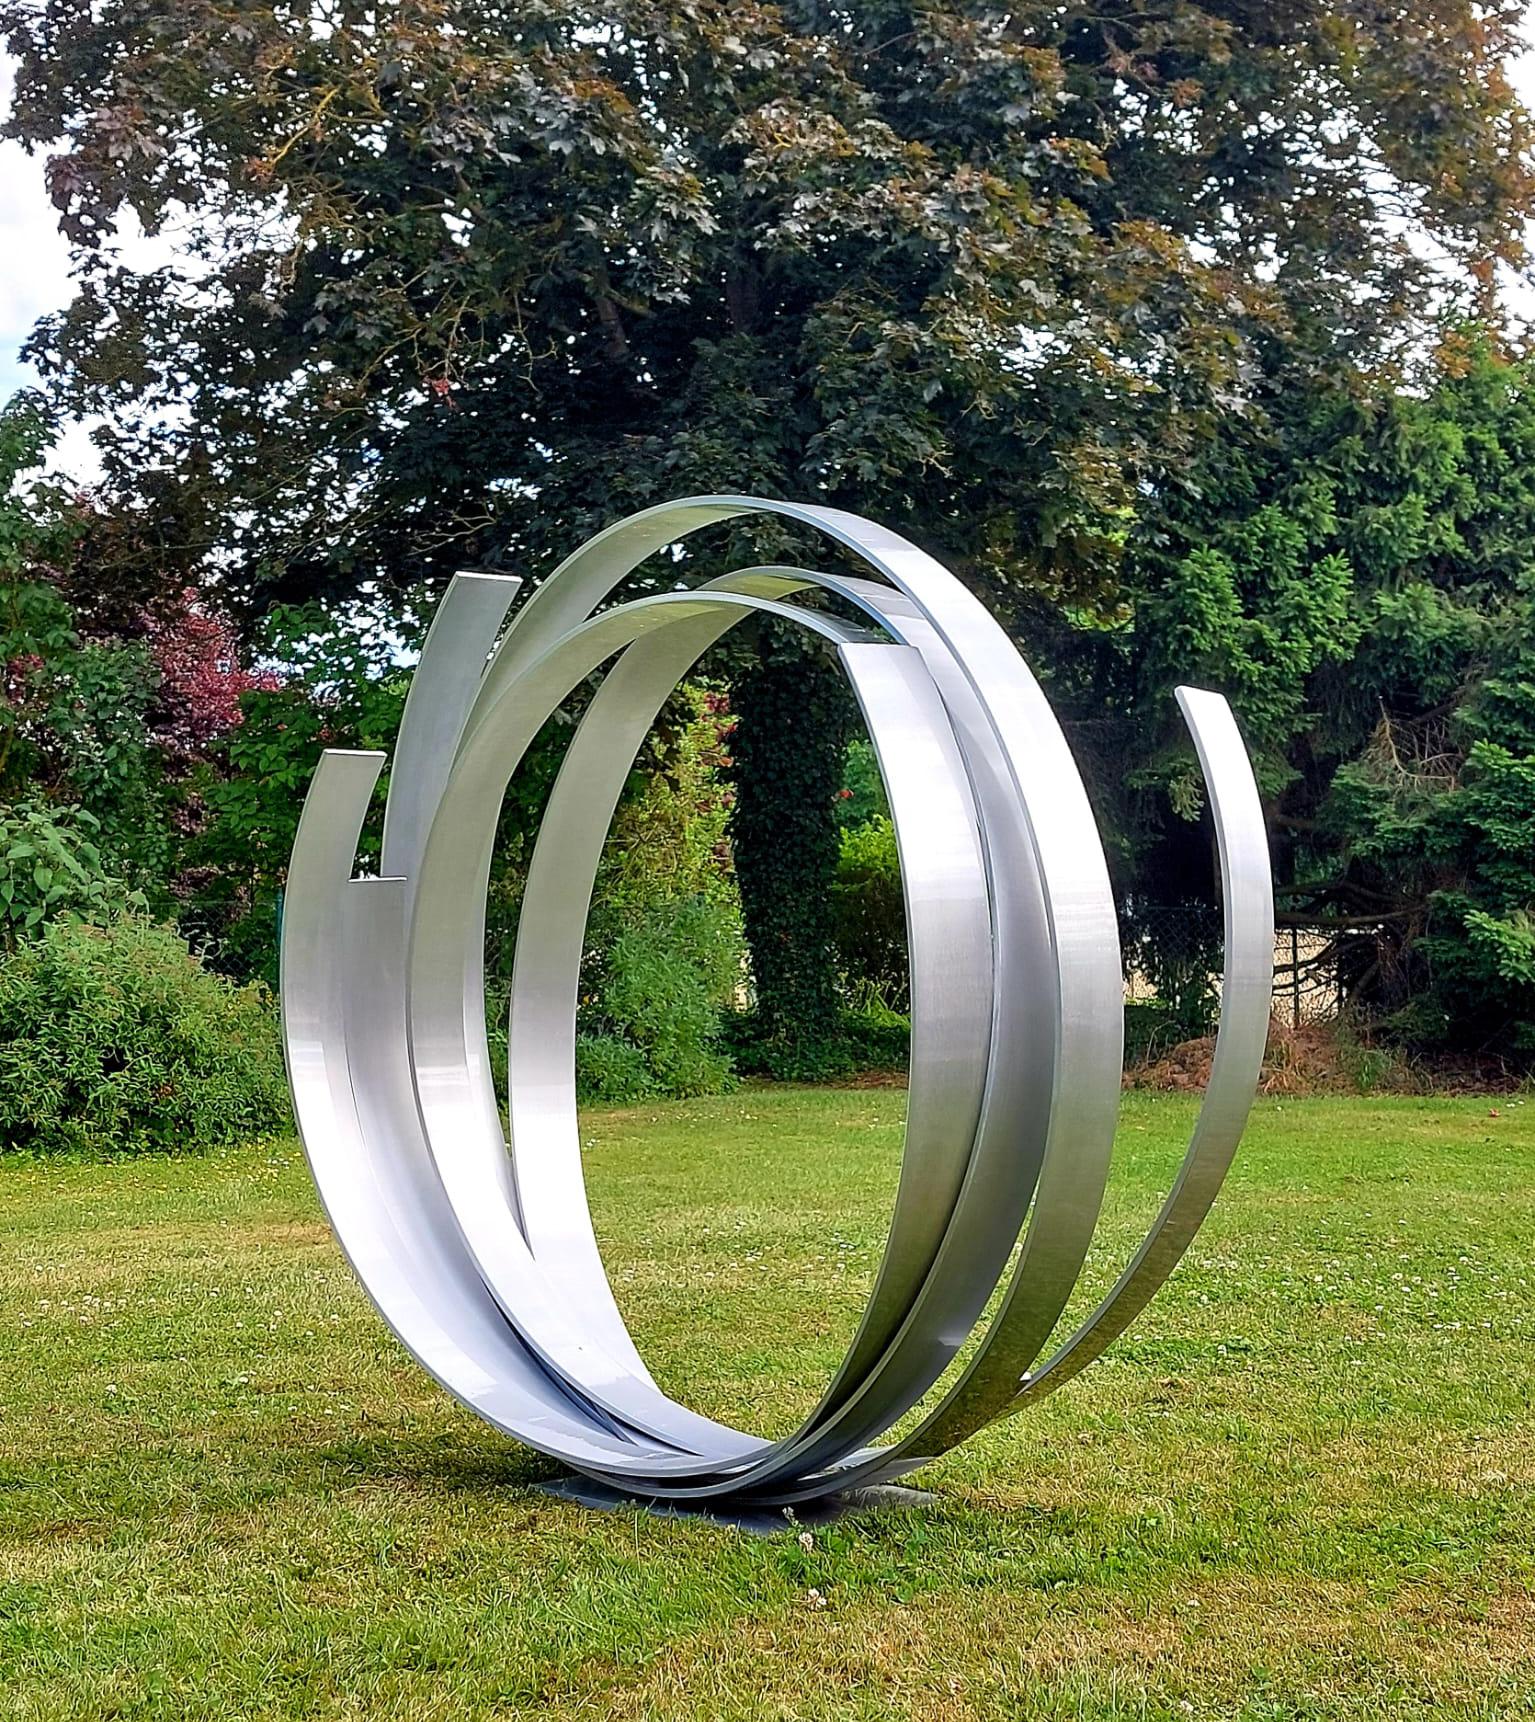 Kuno Vollet Abstract Sculpture - Timeless Orbit - Silver Contemporary Aluminum sculpture for Outdoors